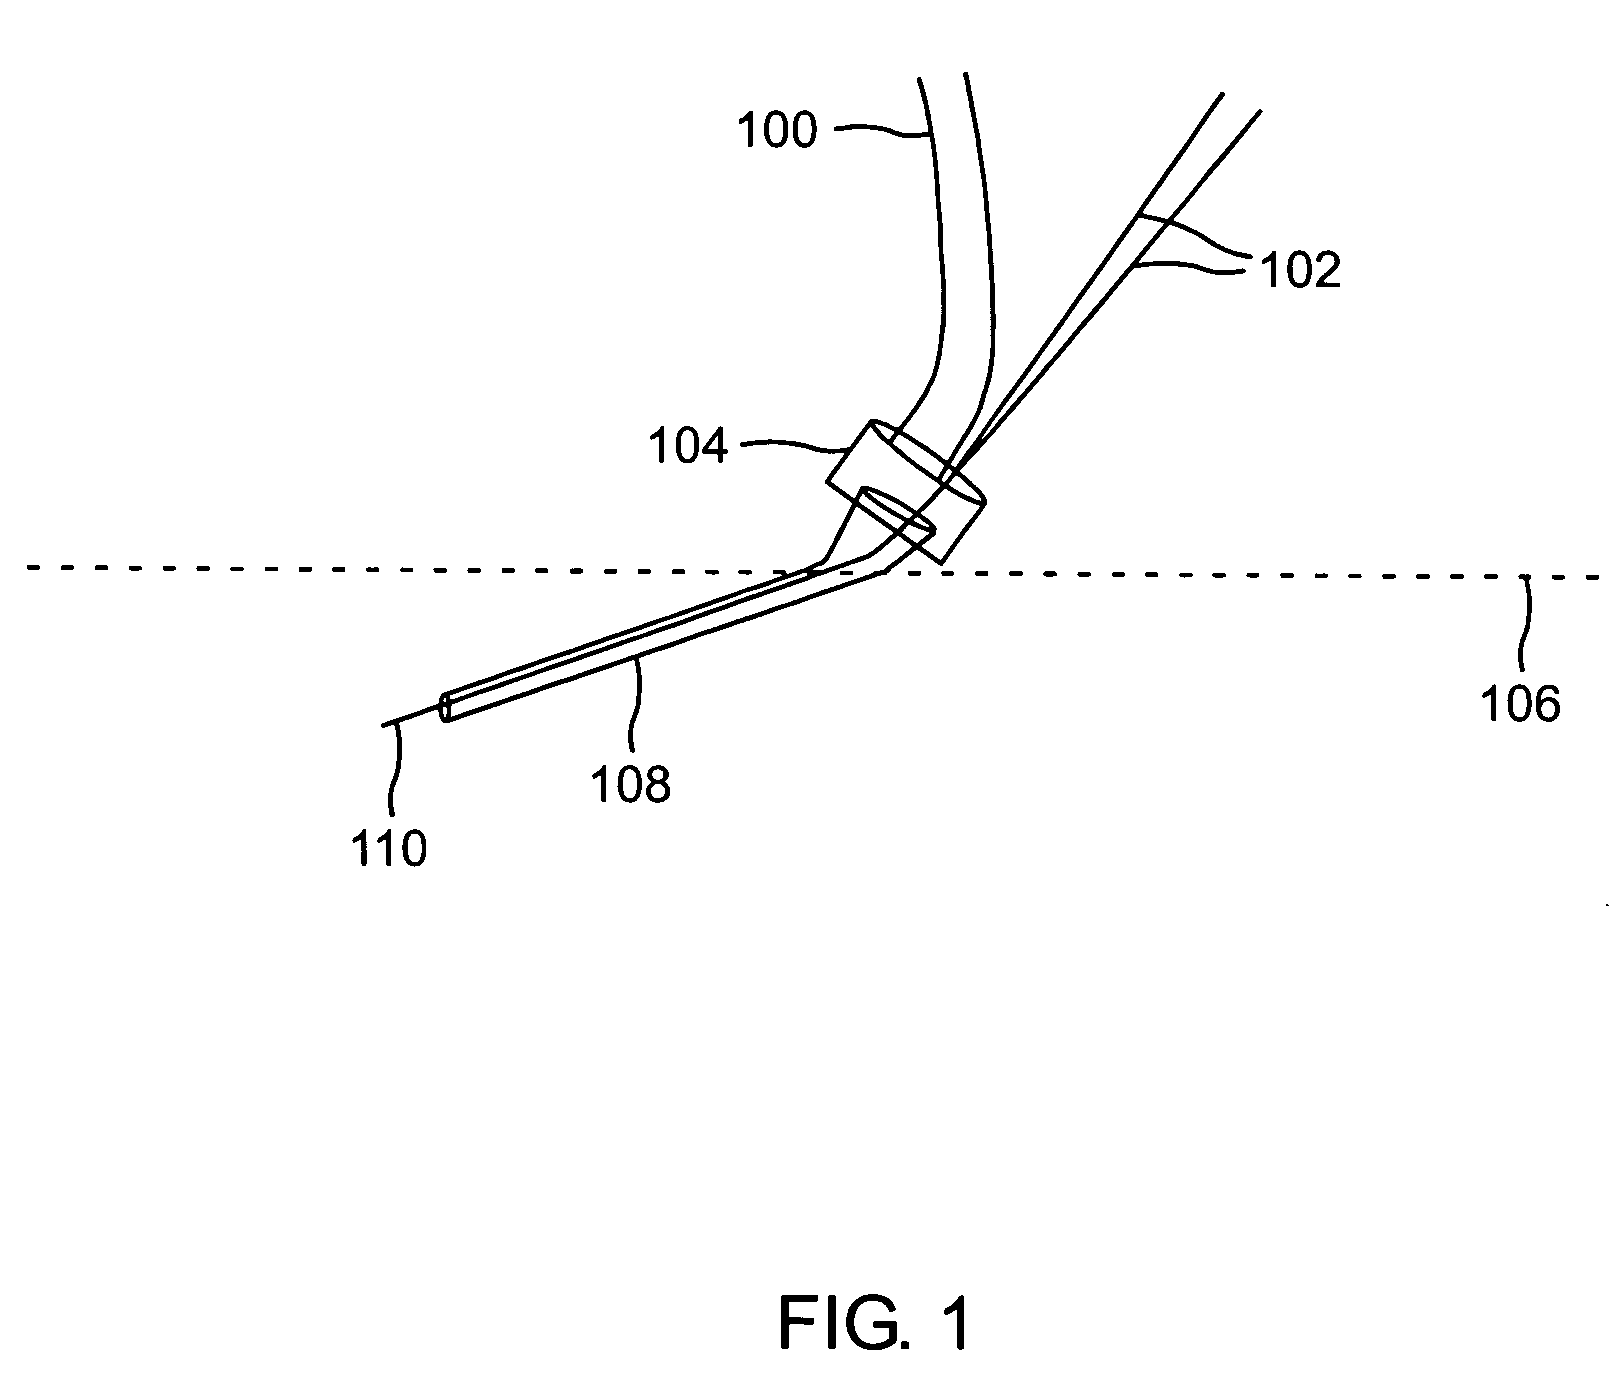 Blood testing and therapeutic compound delivery system